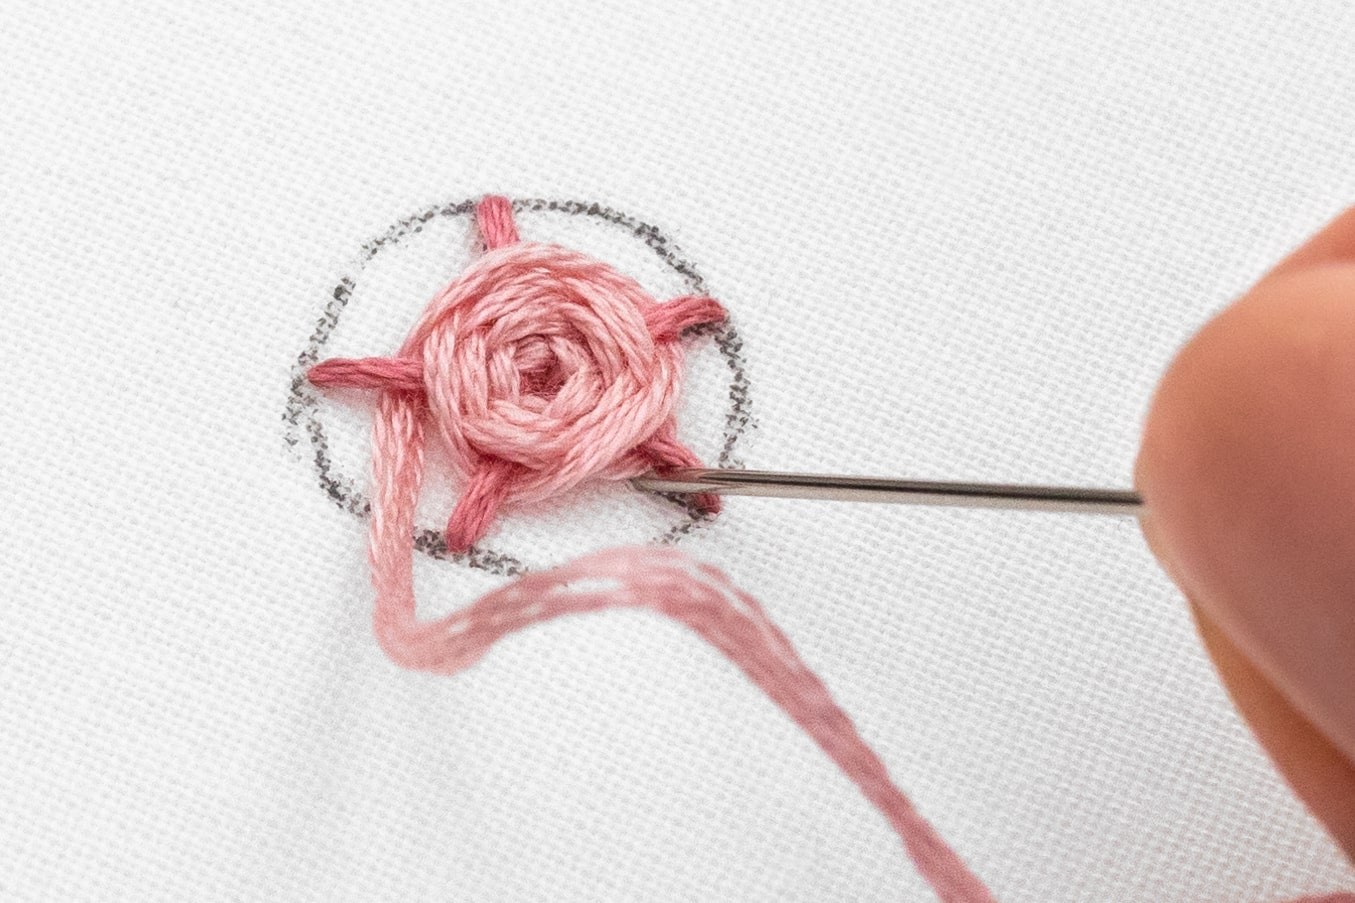 A needle is brought under a spoke of a woven rose.